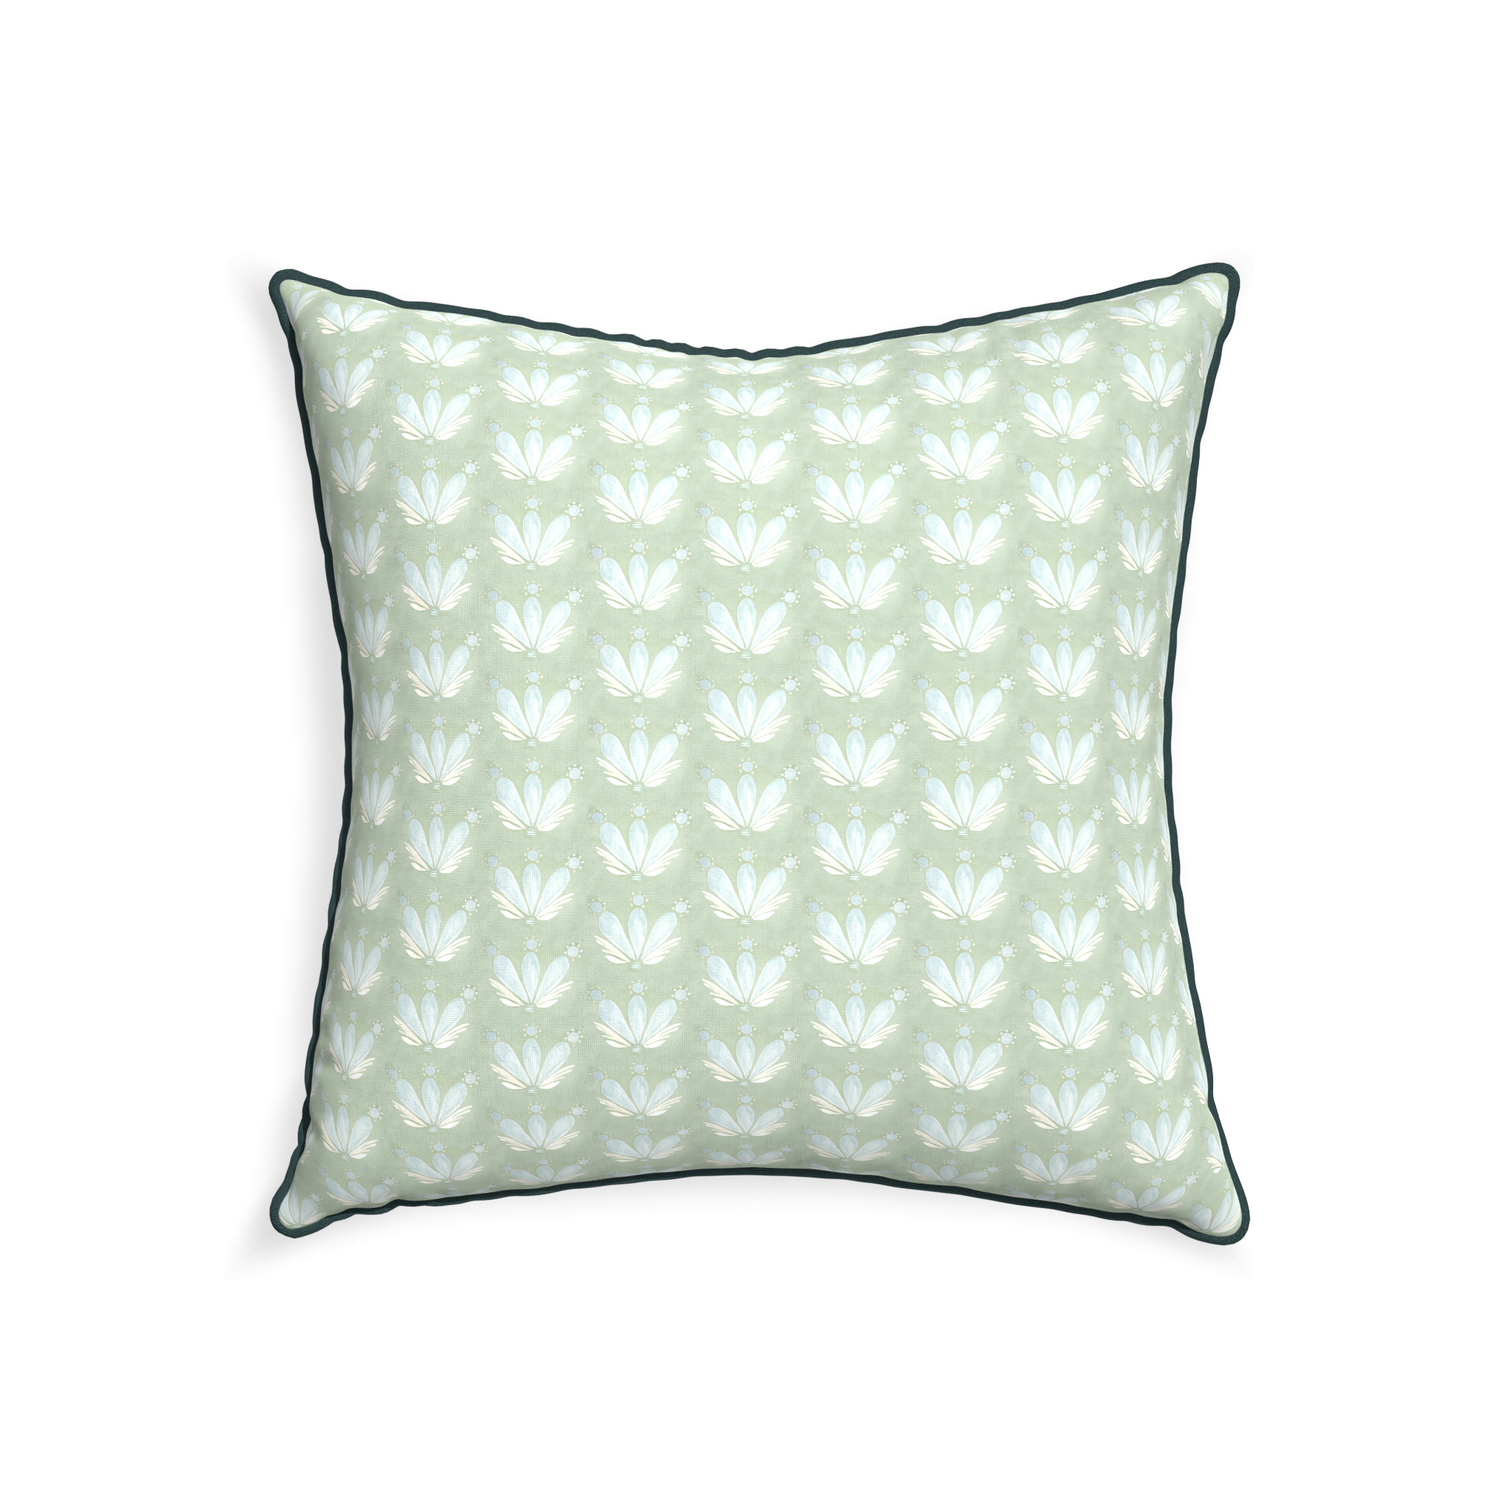 22-square serena sea salt custom blue & green floral drop repeatpillow with p piping on white background